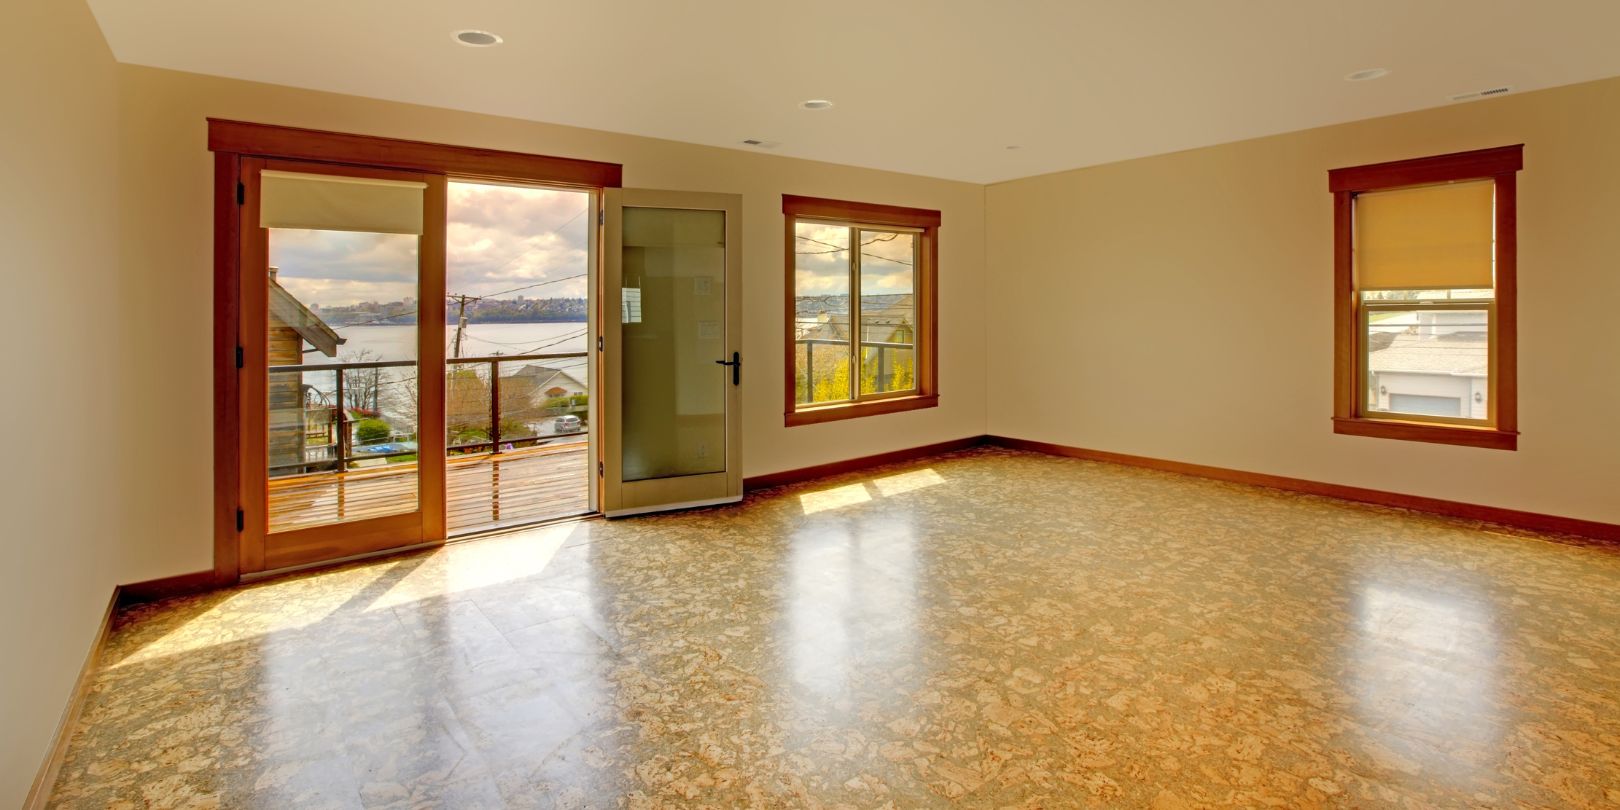 Cork Flooring: Types, Pros and Cons, and Installation Tips - Woodsmith  Guides